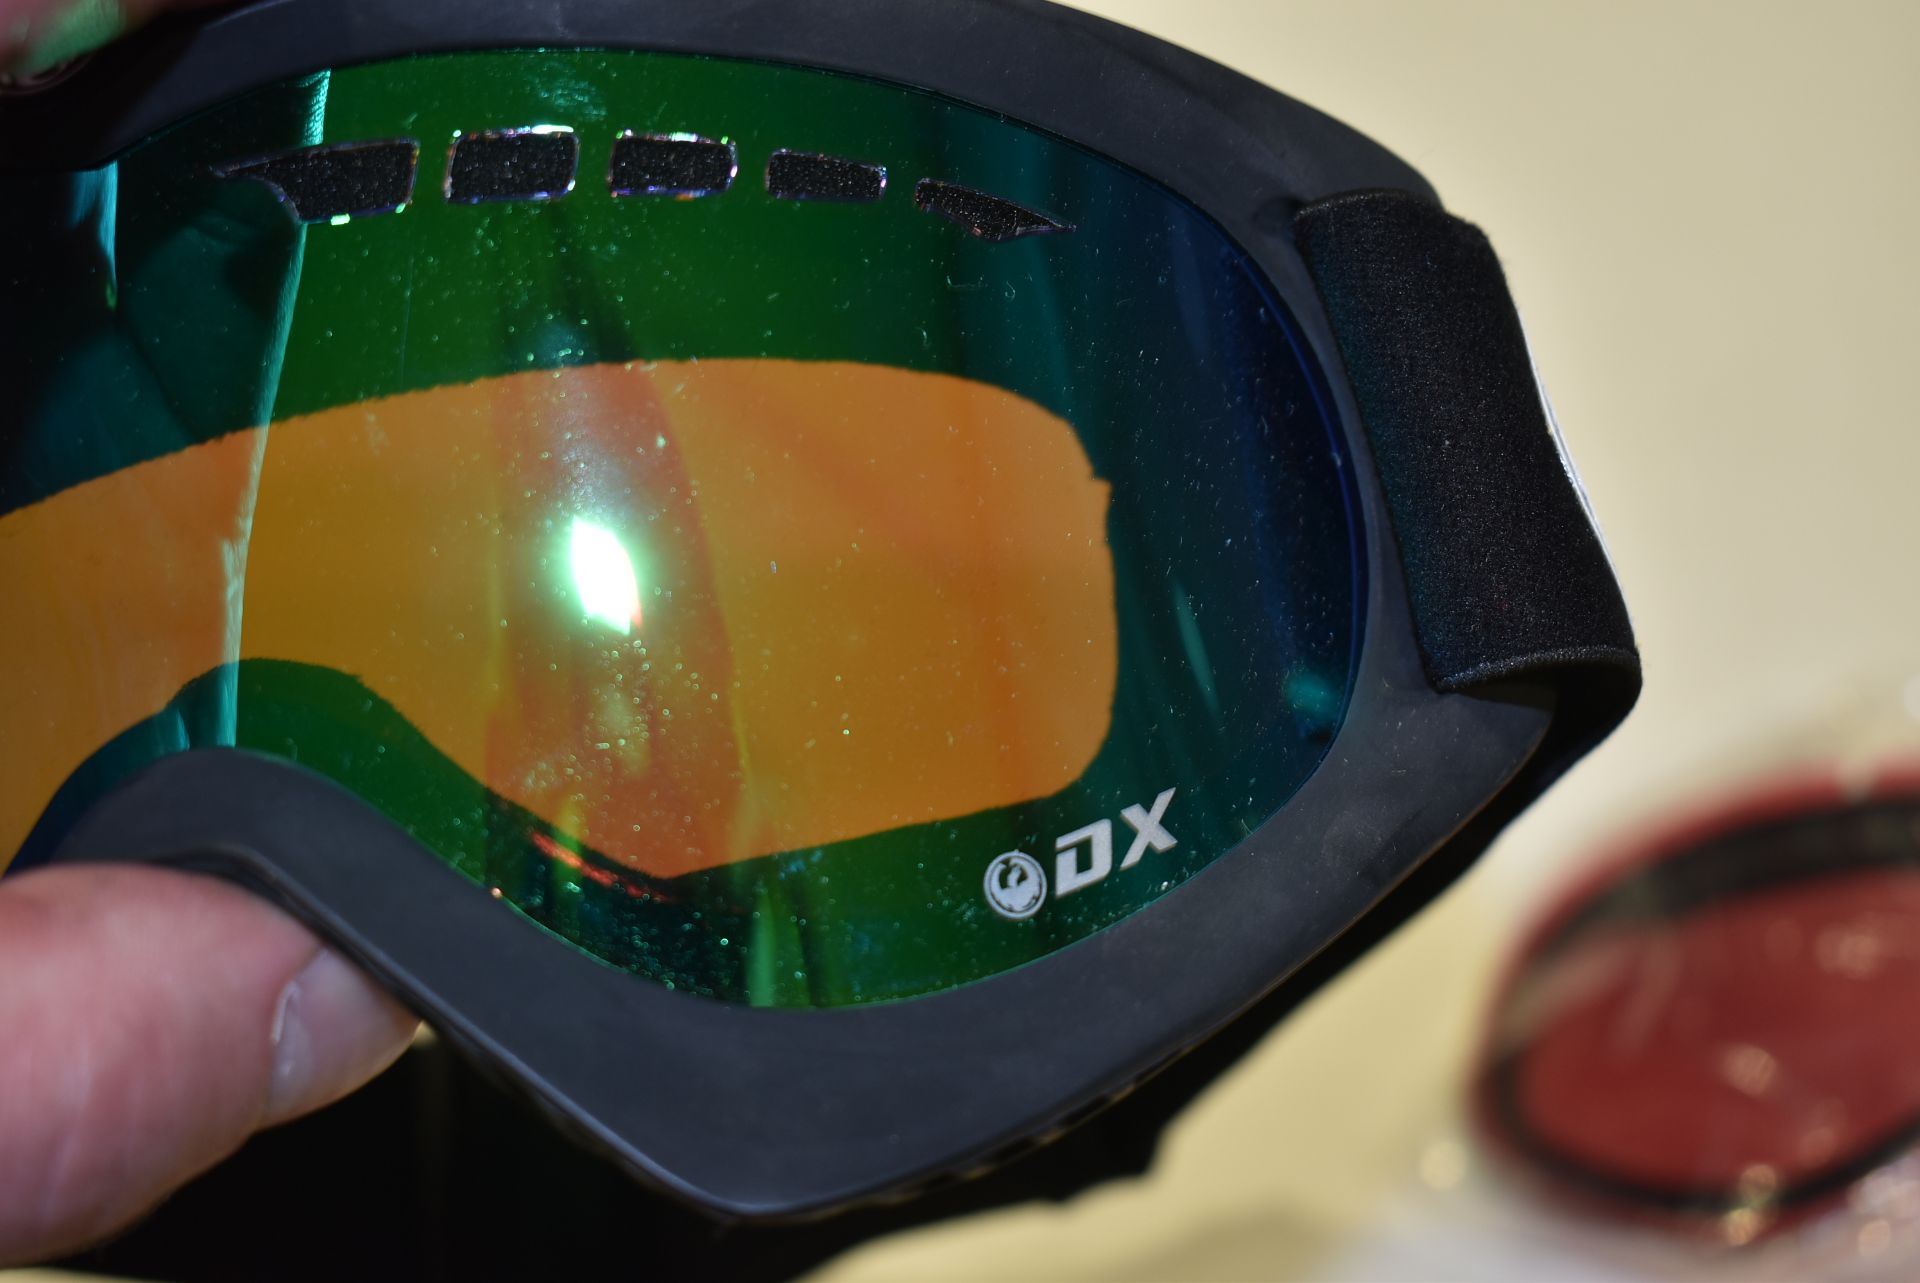 1 x Pair of Oakely Snow Goggles With Interchangeable Lenses and Carry Case - CL431 - Ref CB142 - - Image 3 of 8